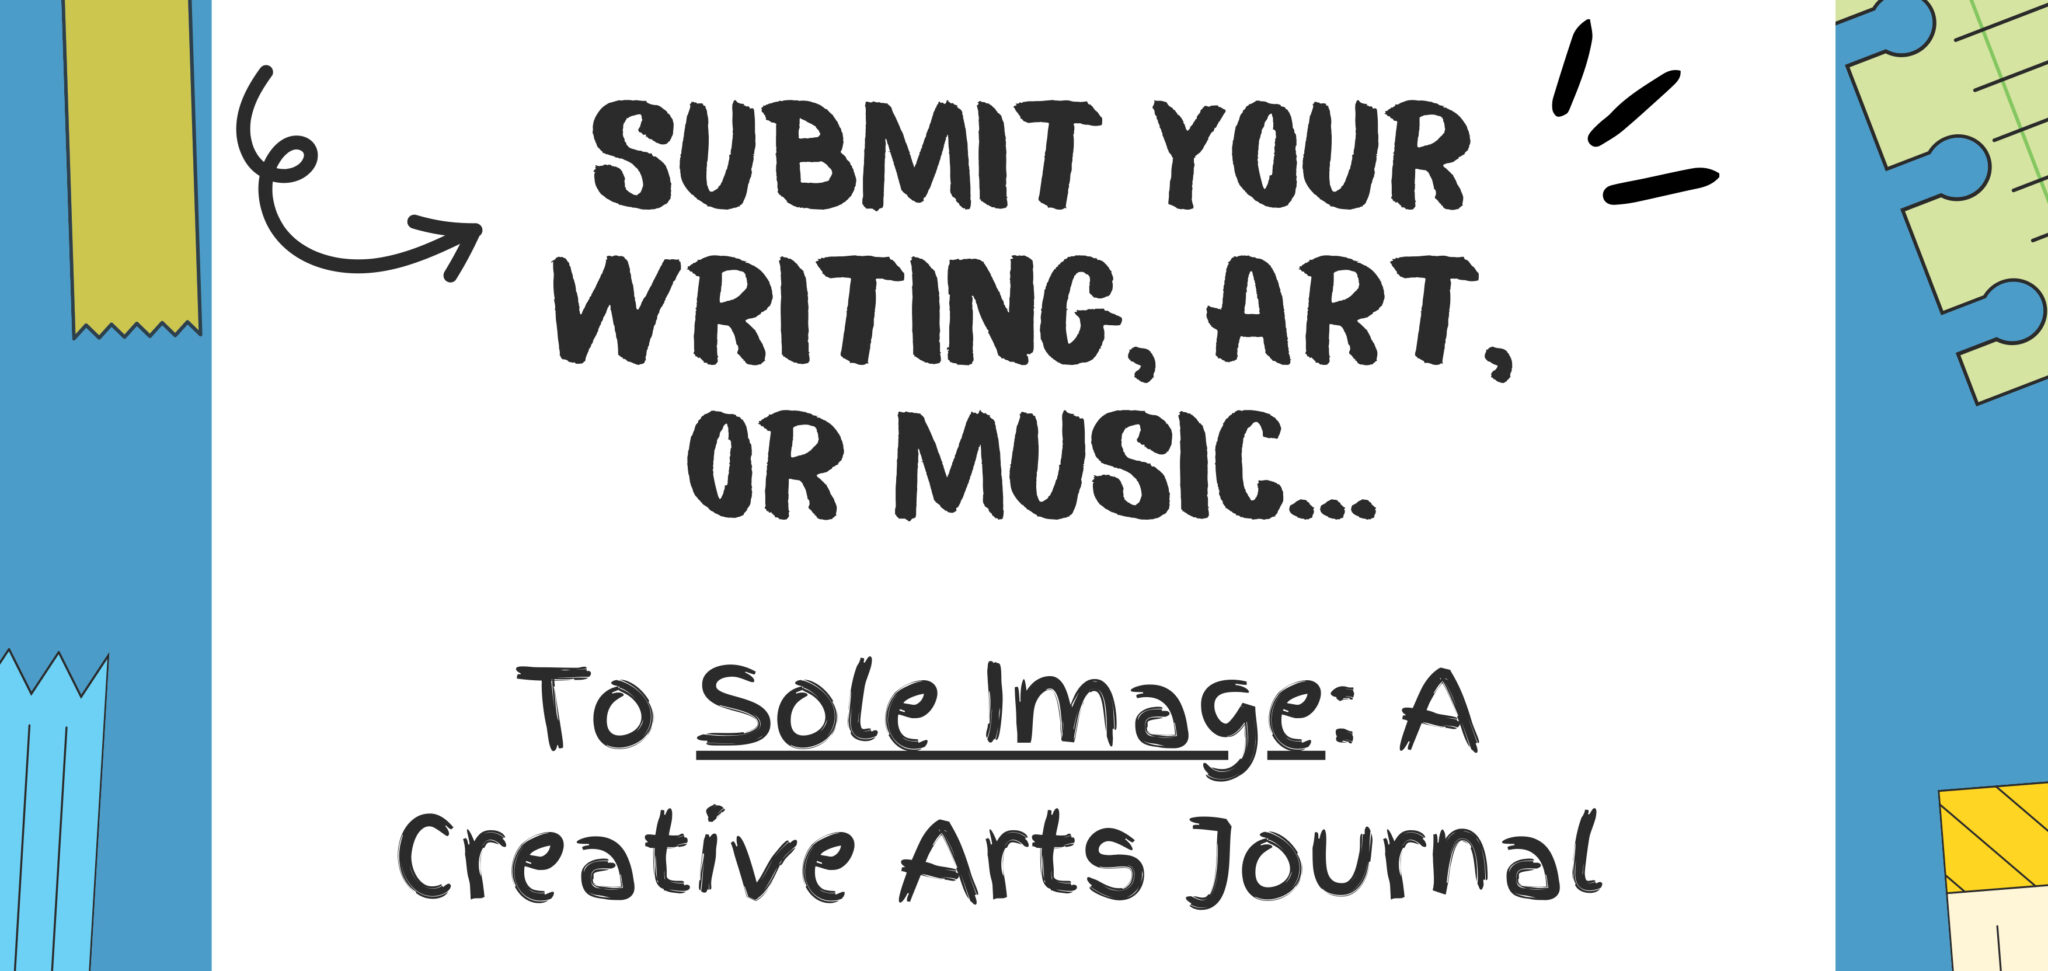 Graphic for Sole Image Creative Arts Journal submissions.